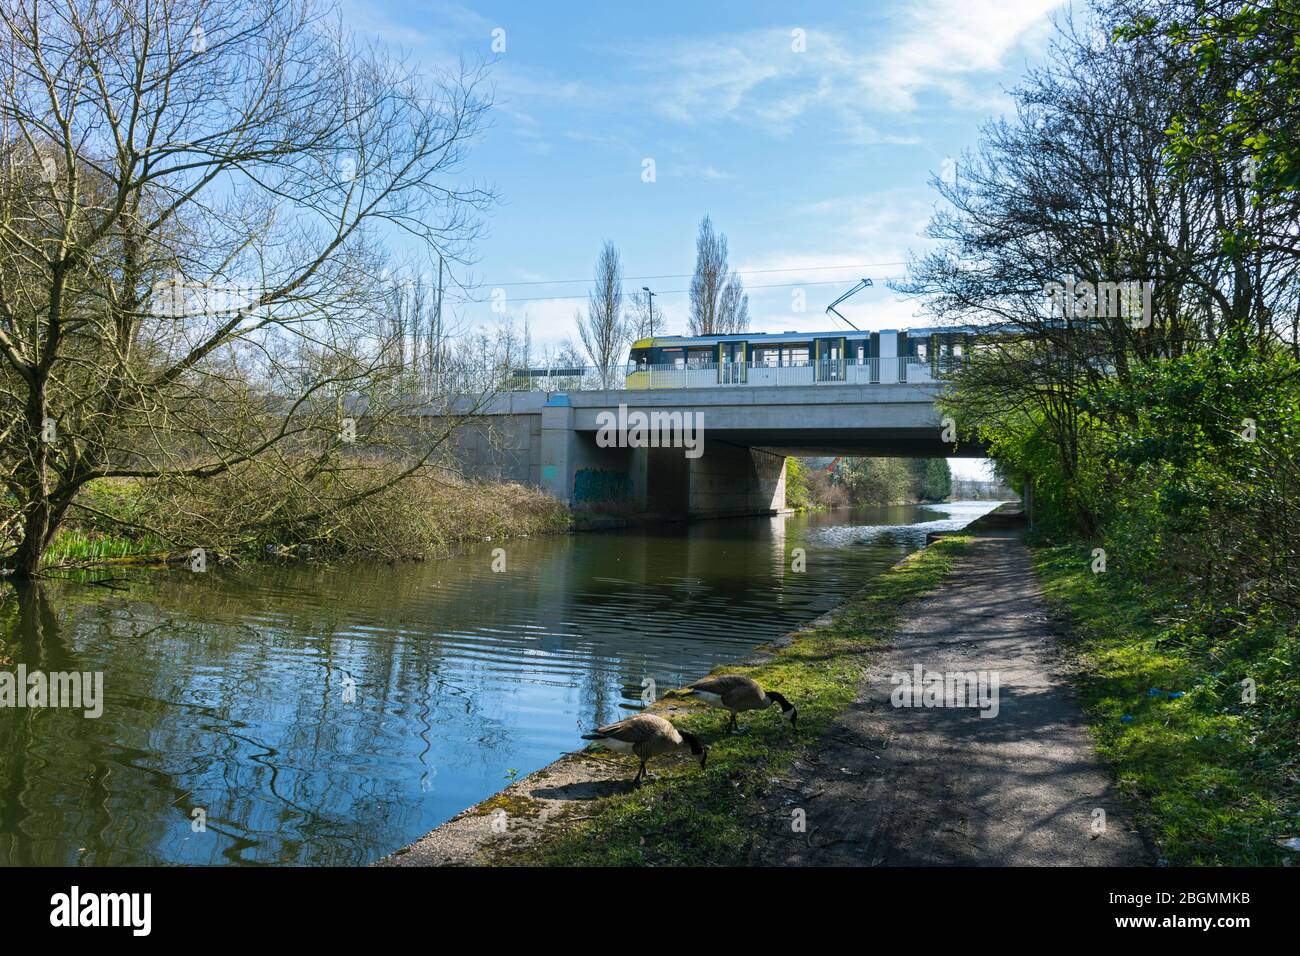 Metrolink tram crossing the Bridgewater Canal on the opening day of the Trafford Park Line, 22 March 2020.  Barton Dock Rd., Trafford, Manchester, UK Stock Photo